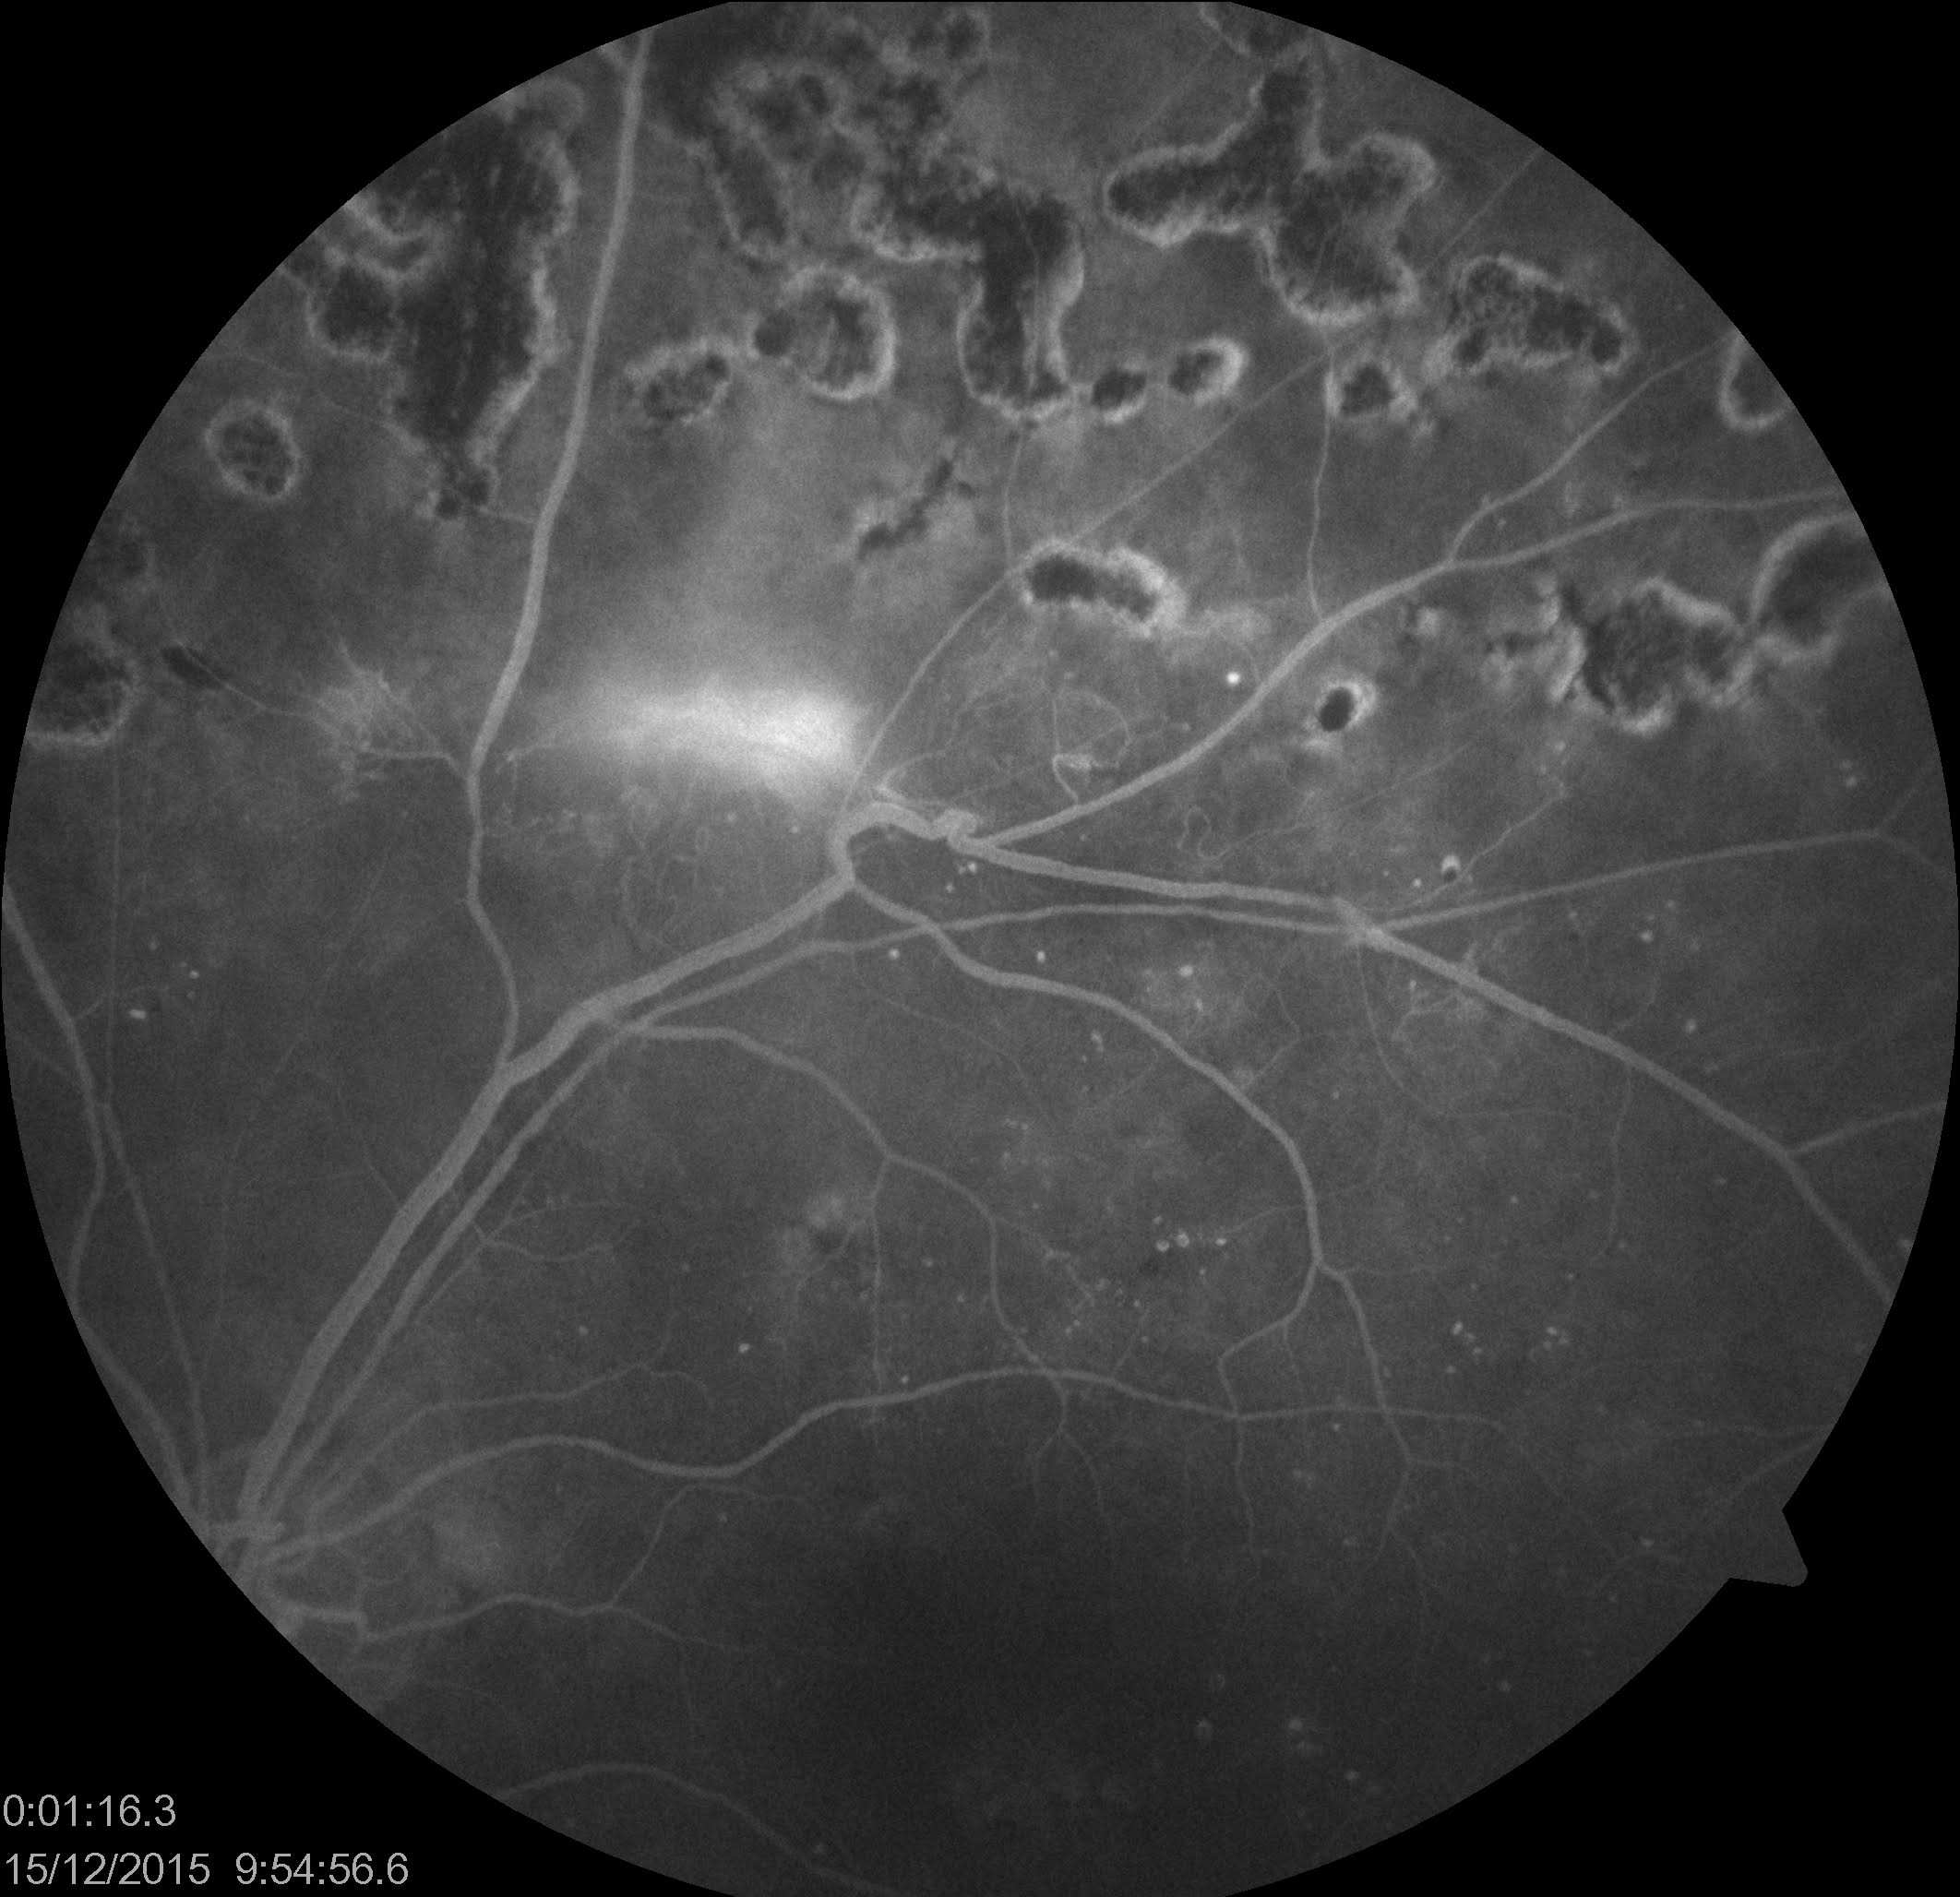 New vessel elsewhere (NVE) in the retina in a patient with proliferative diabetic retinopathy (with history of panretinal photocoagulation)